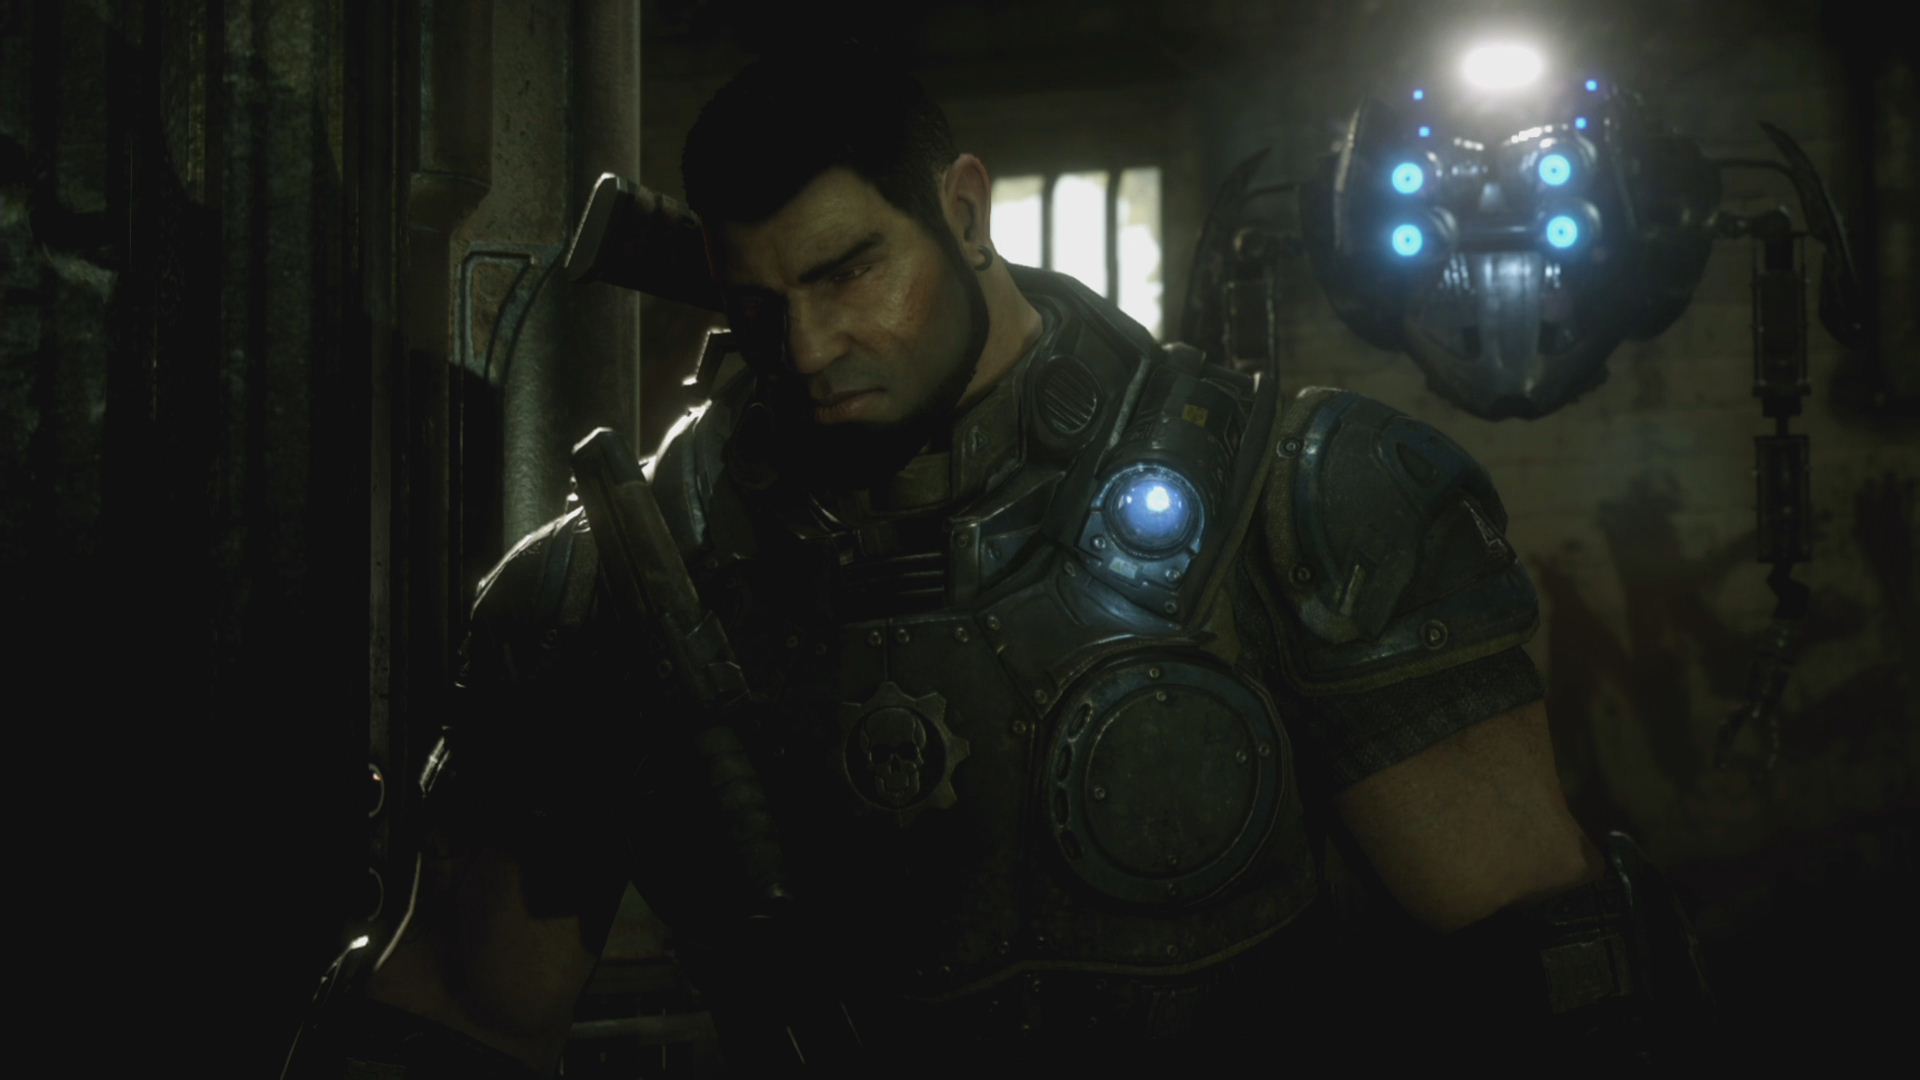 download gears of war 4 xbox one for free